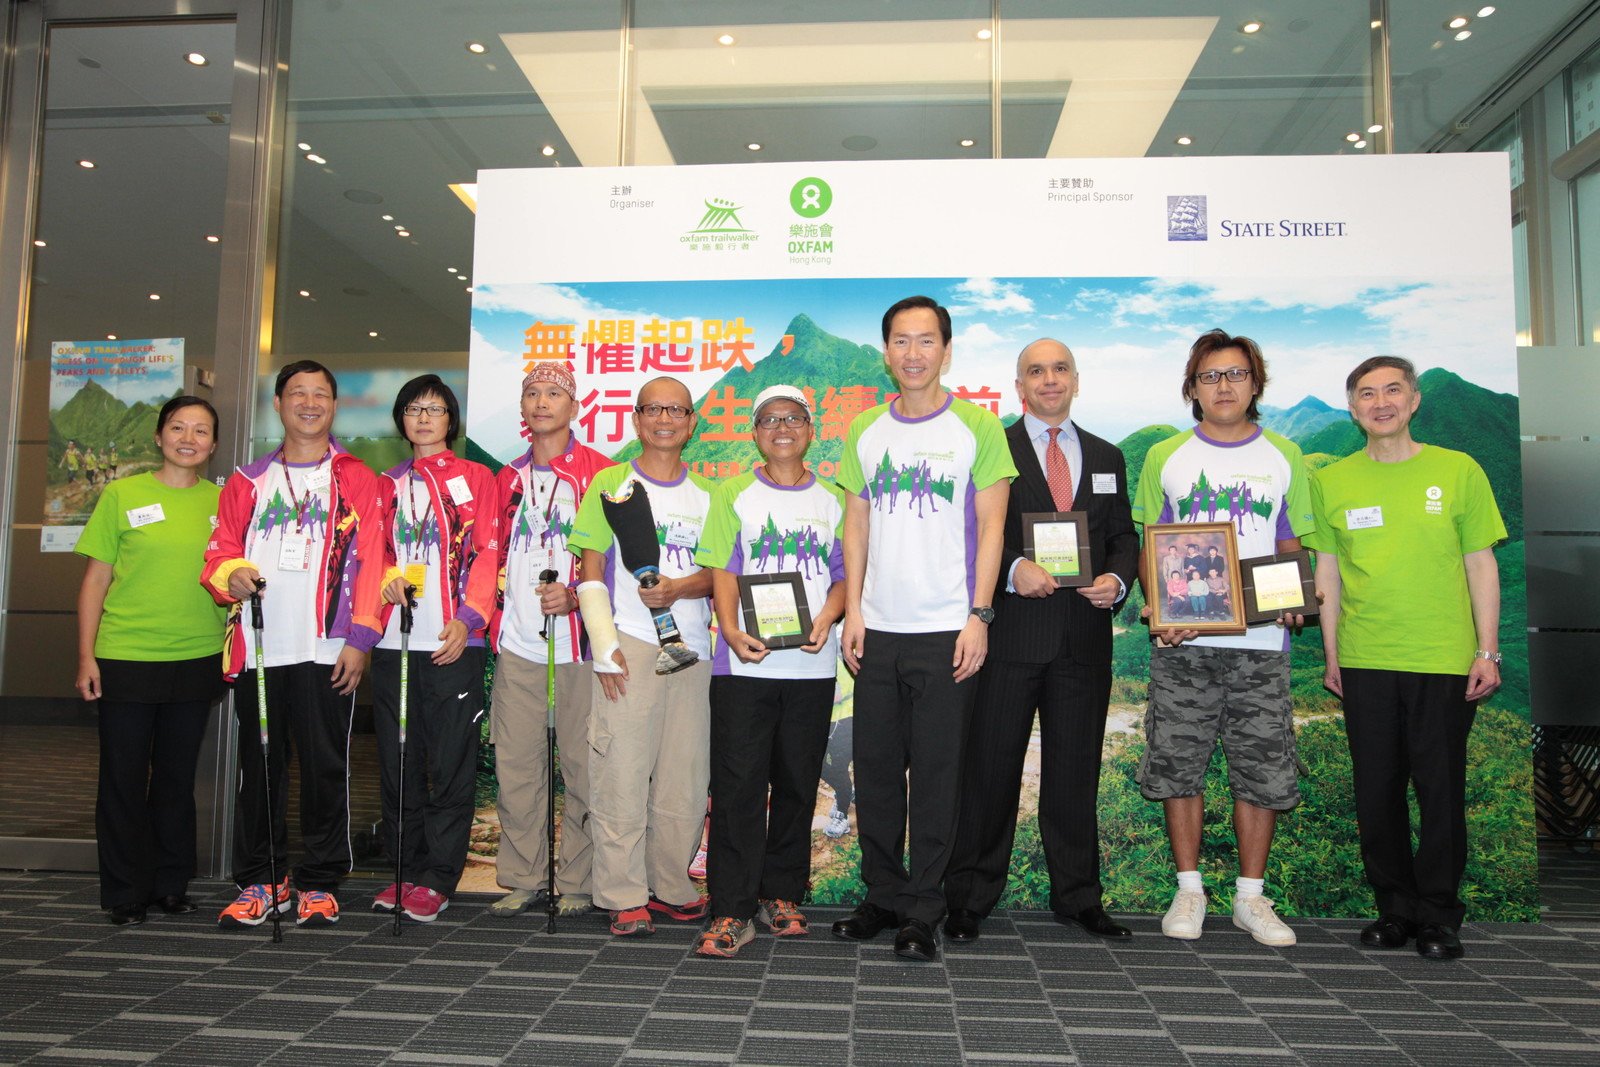 (From left to right) Kanie Siu (Director of Fundraising & Communications, Oxfam Hong Kong); Kim Mok (visually-impaired trailwalker); Alsa Kwok (visually-impaired trailwalker); Michael Ng (hearing-impaired trailwalker), amputee trailwalker Fung Kam Hung; Mrs Fung; Bernard Chan, Francesco M. Squillacioti from State Street; Tse Chi Kin; Stephen Fisher (Director General, Oxfam Hong Kong) gathered for a group photo.